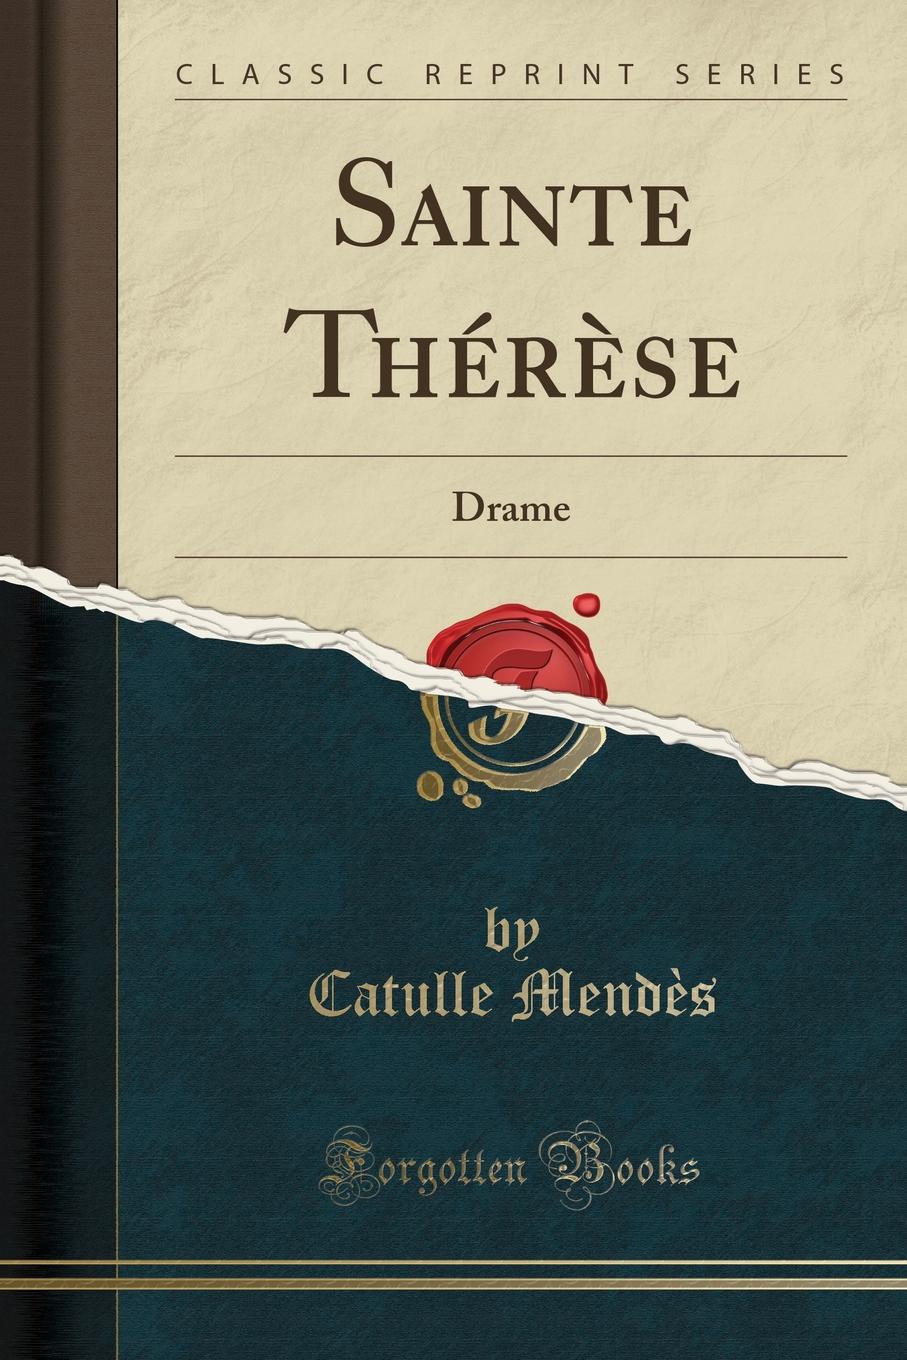 Catulle Mendès Sainte Therese. Drame (Classic Reprint)